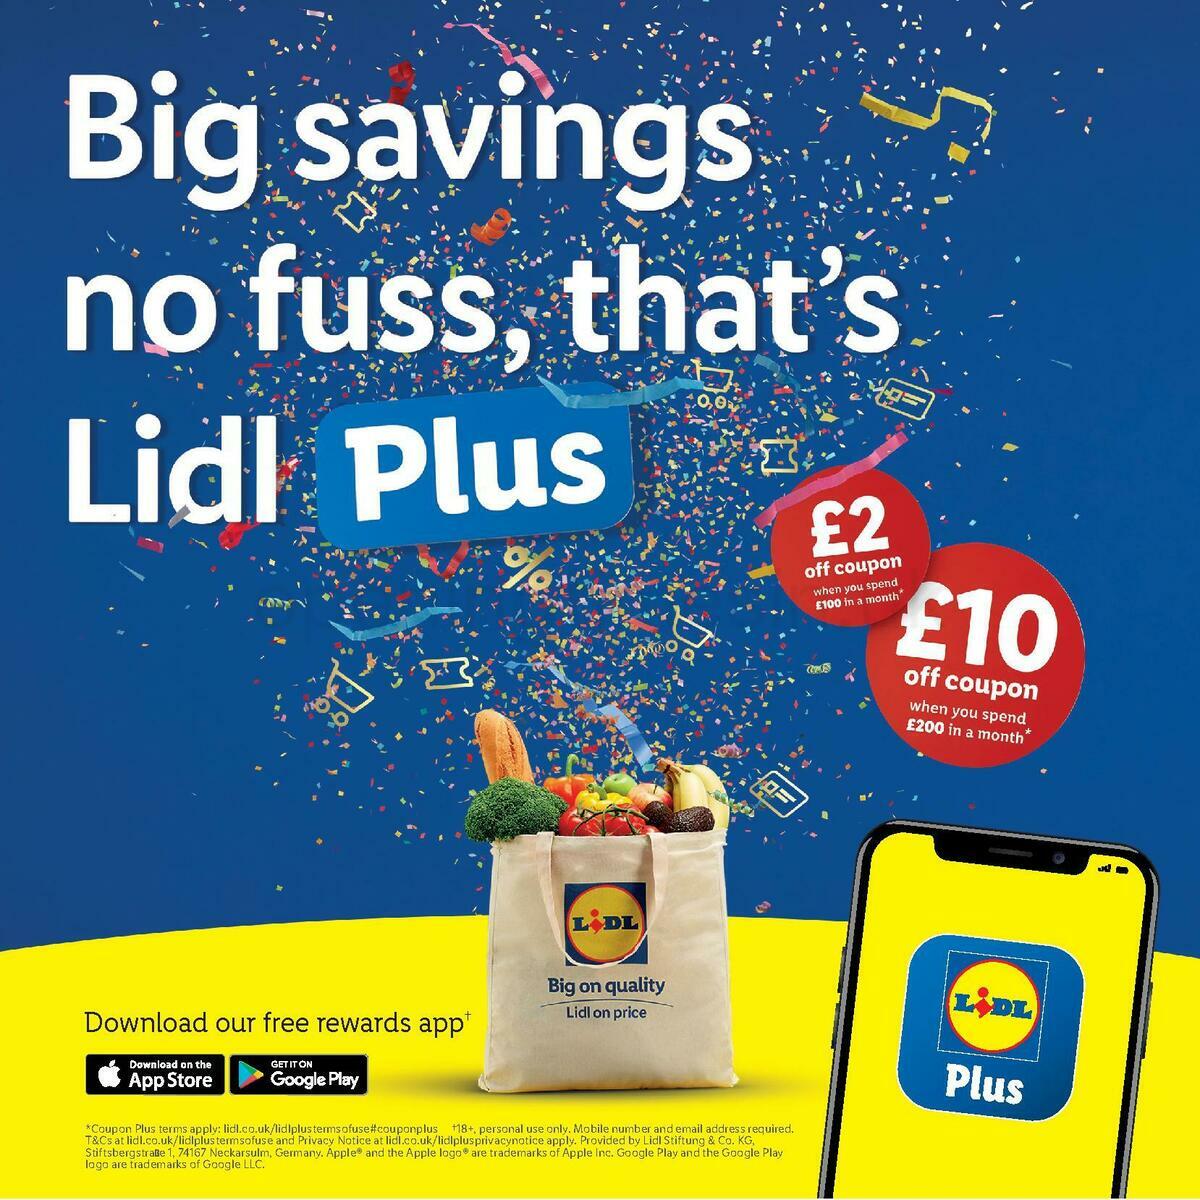 LIDL Autumn Magazine England & Wales Offers from 10 September